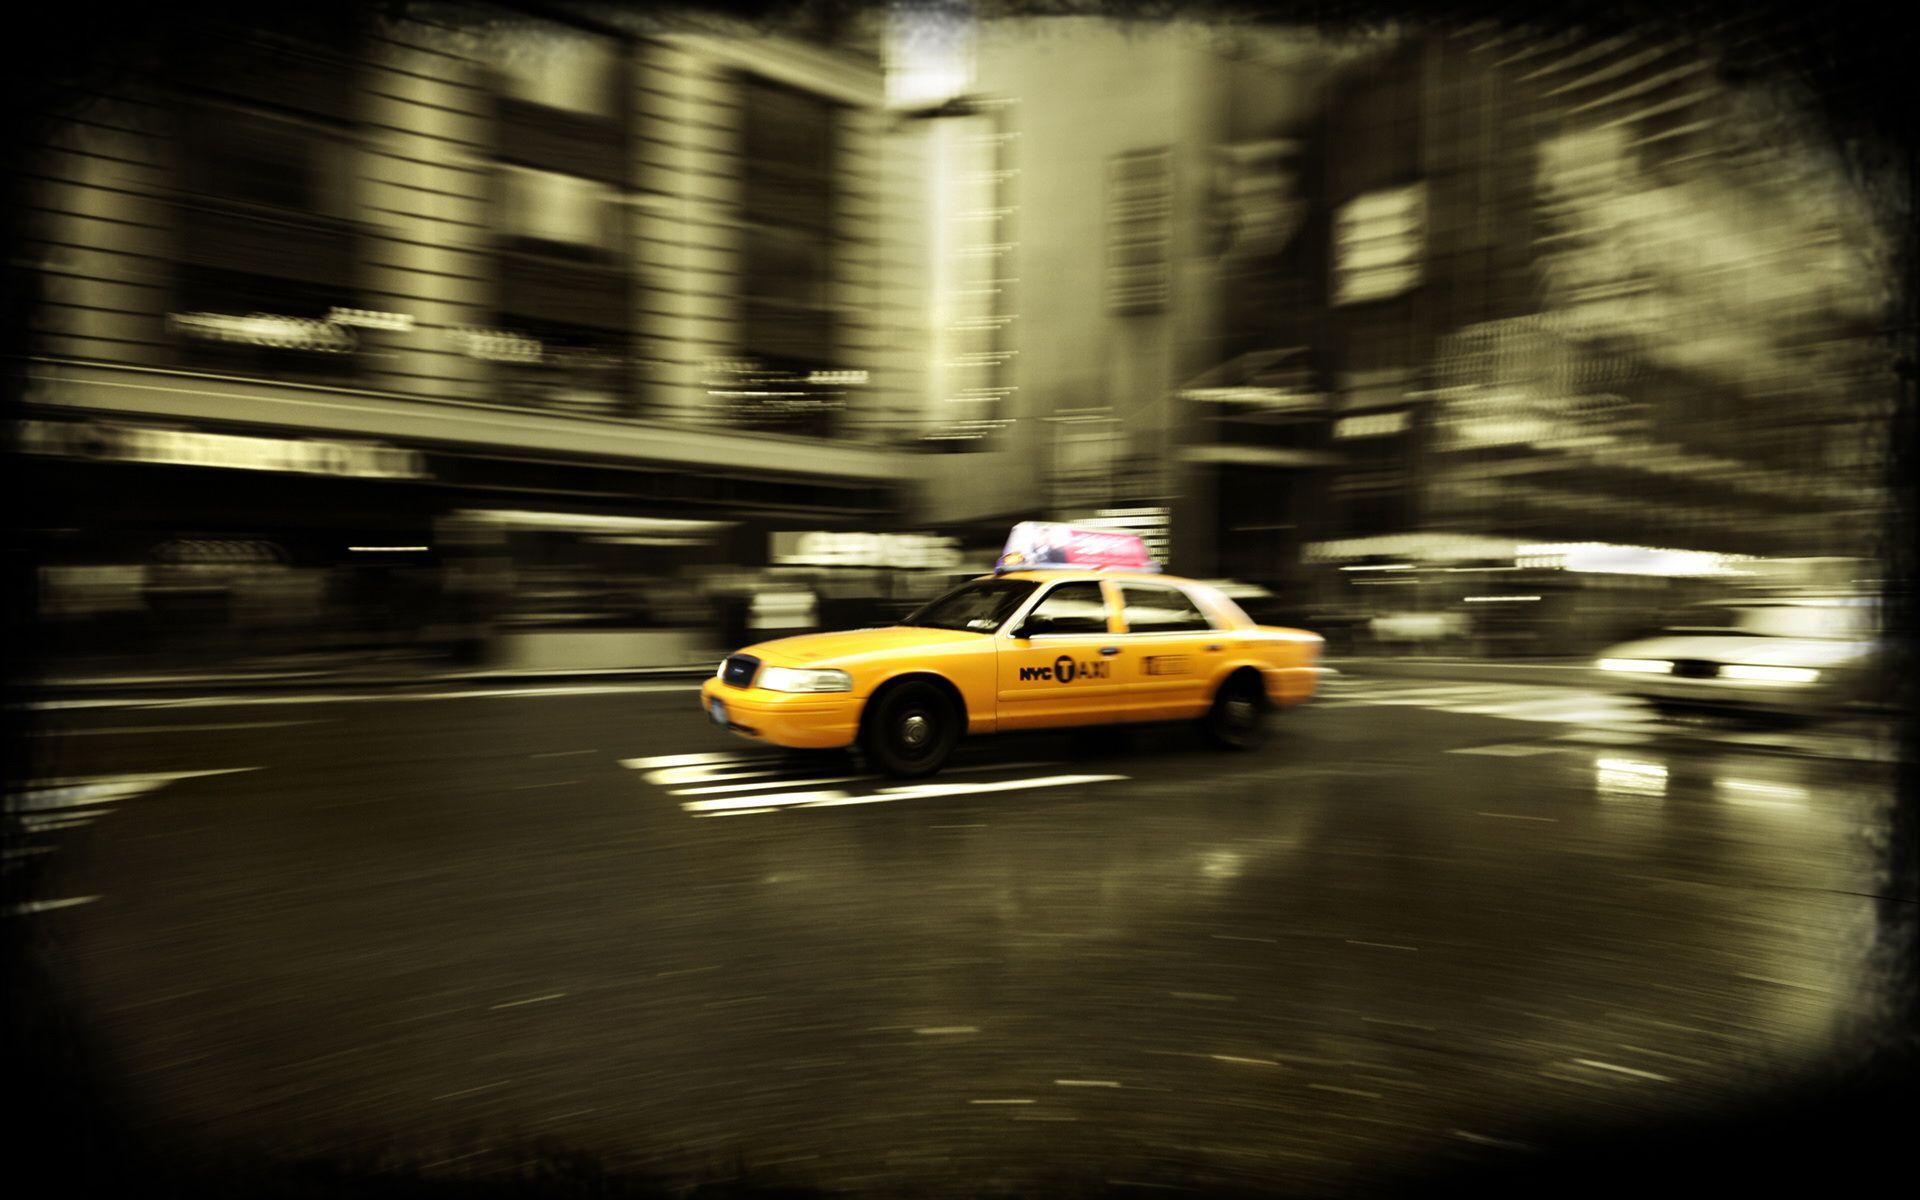 Taxi Wallpaper, Taxi Wallpaper and Picture Collection